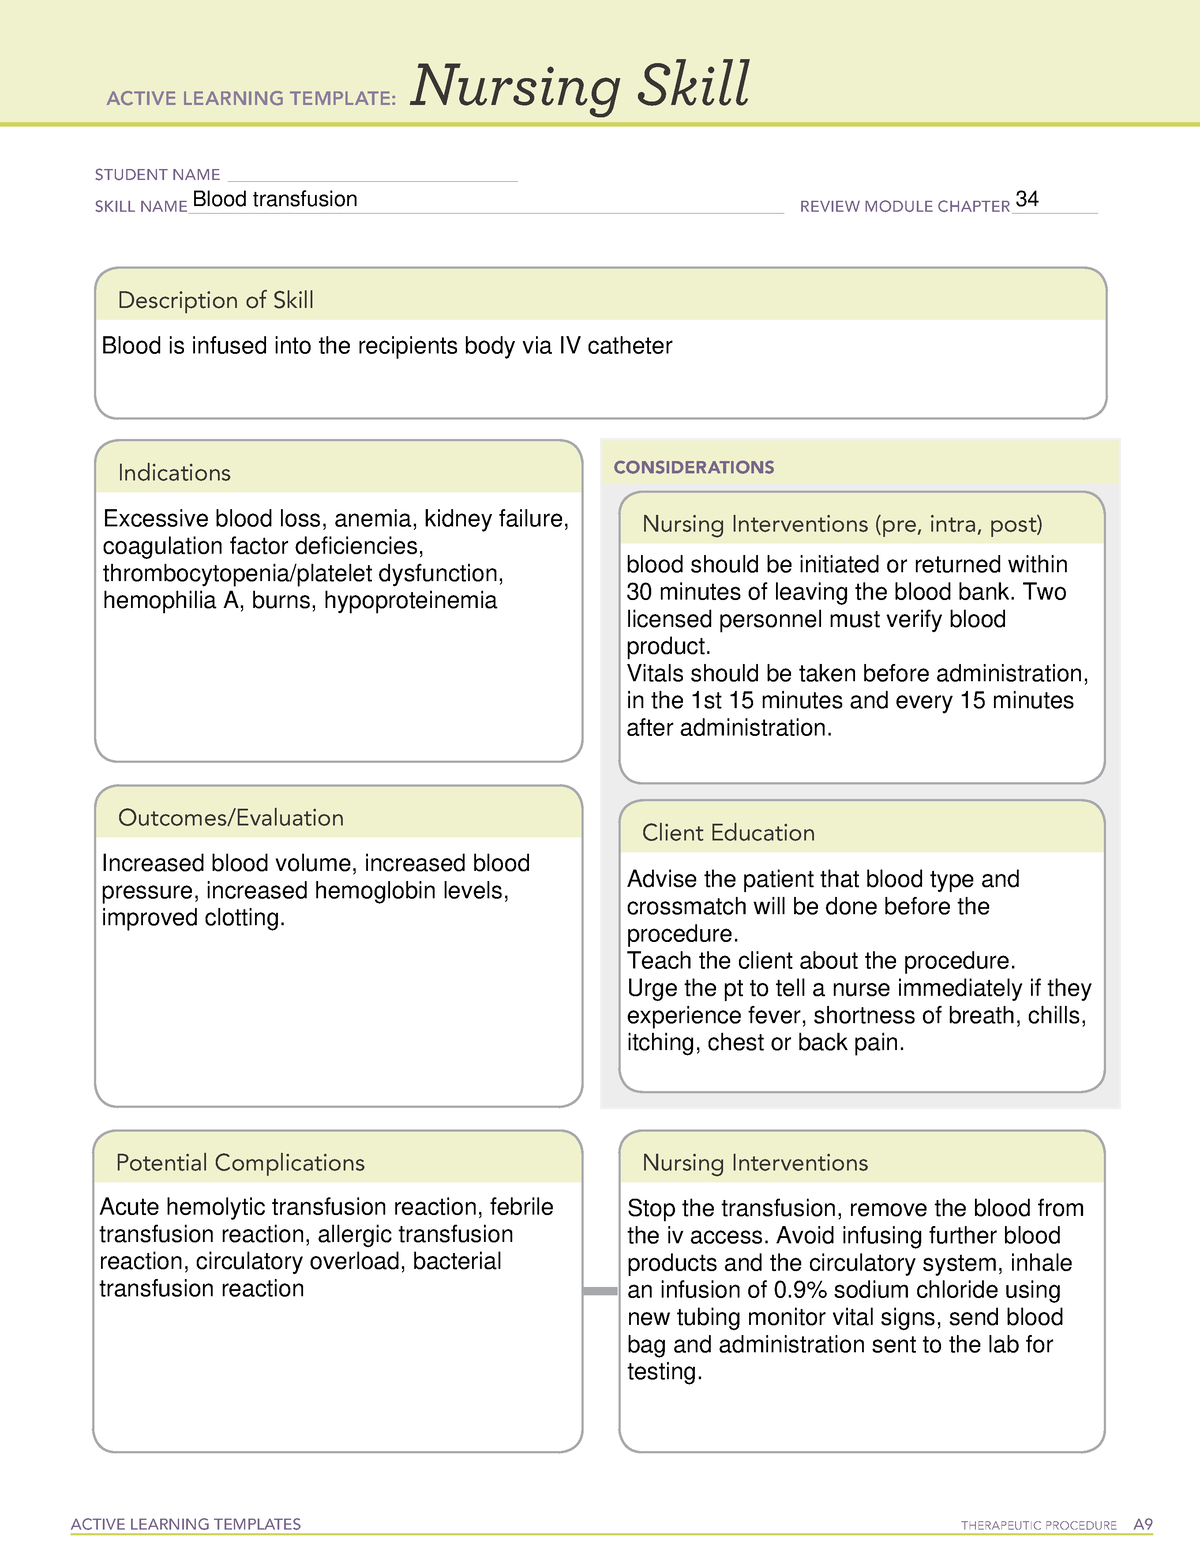 Blood transfusion ALT ACTIVE LEARNING TEMPLATES THERAPEUTIC PROCEDURE